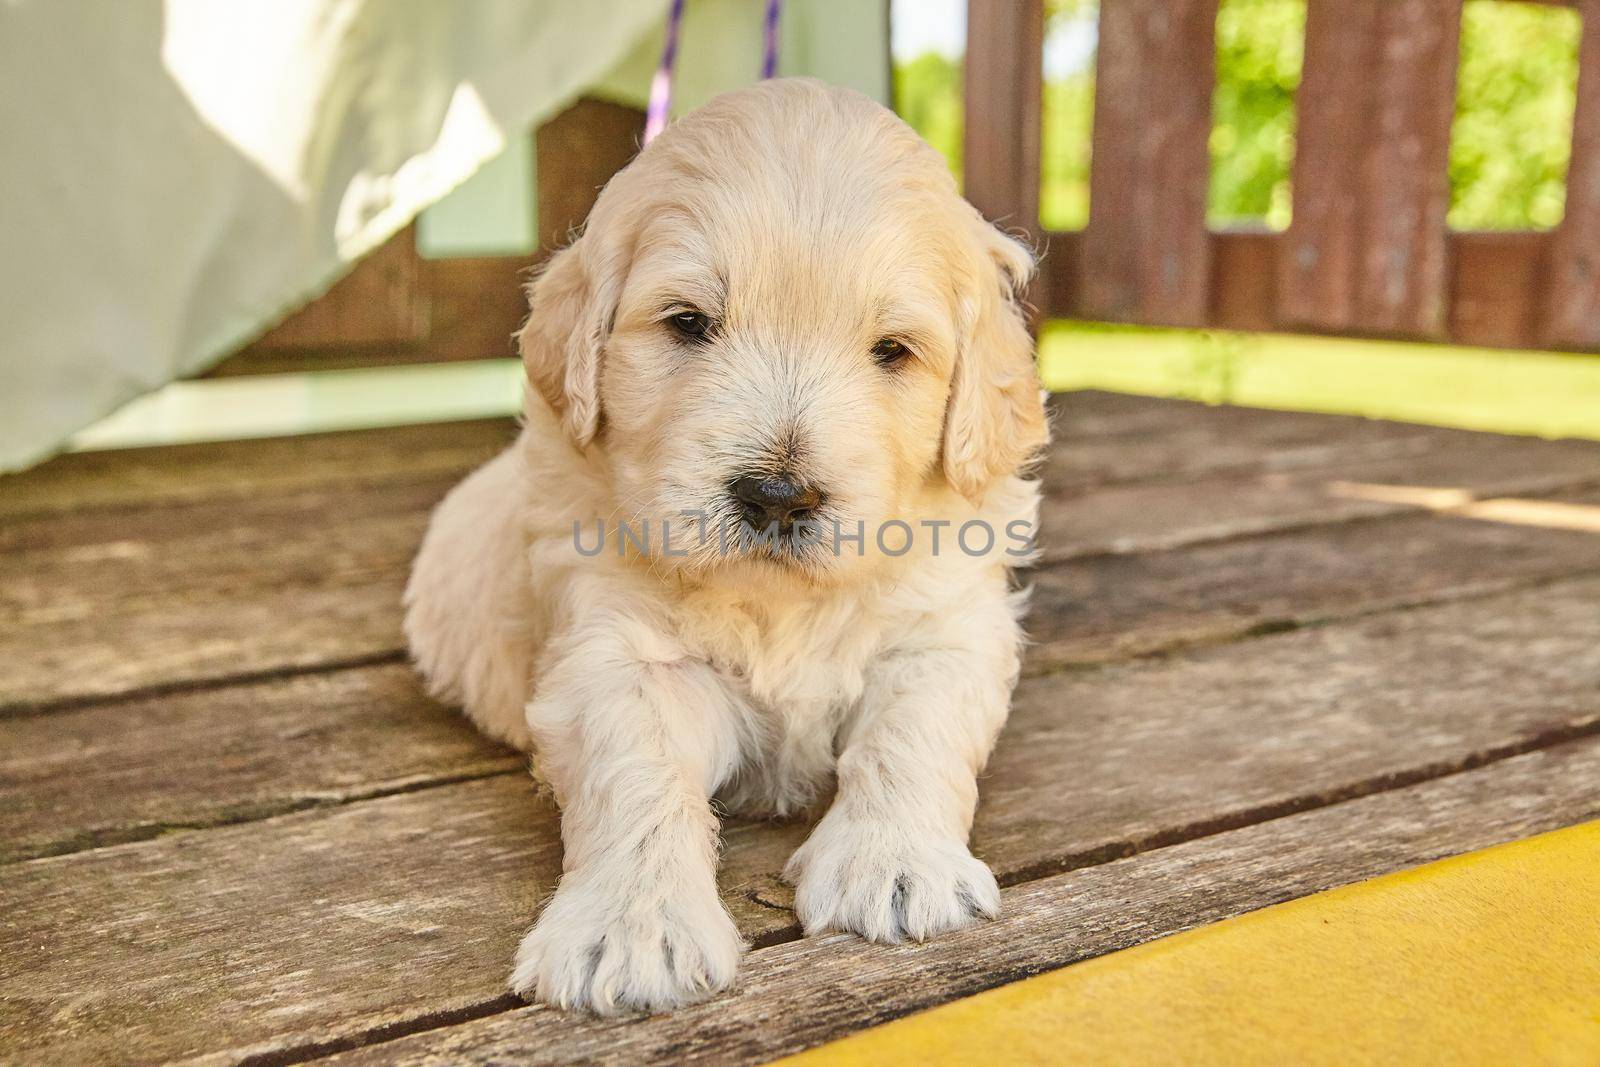 Image of White Goldendoodle puppy sitting in shade of deck furniture